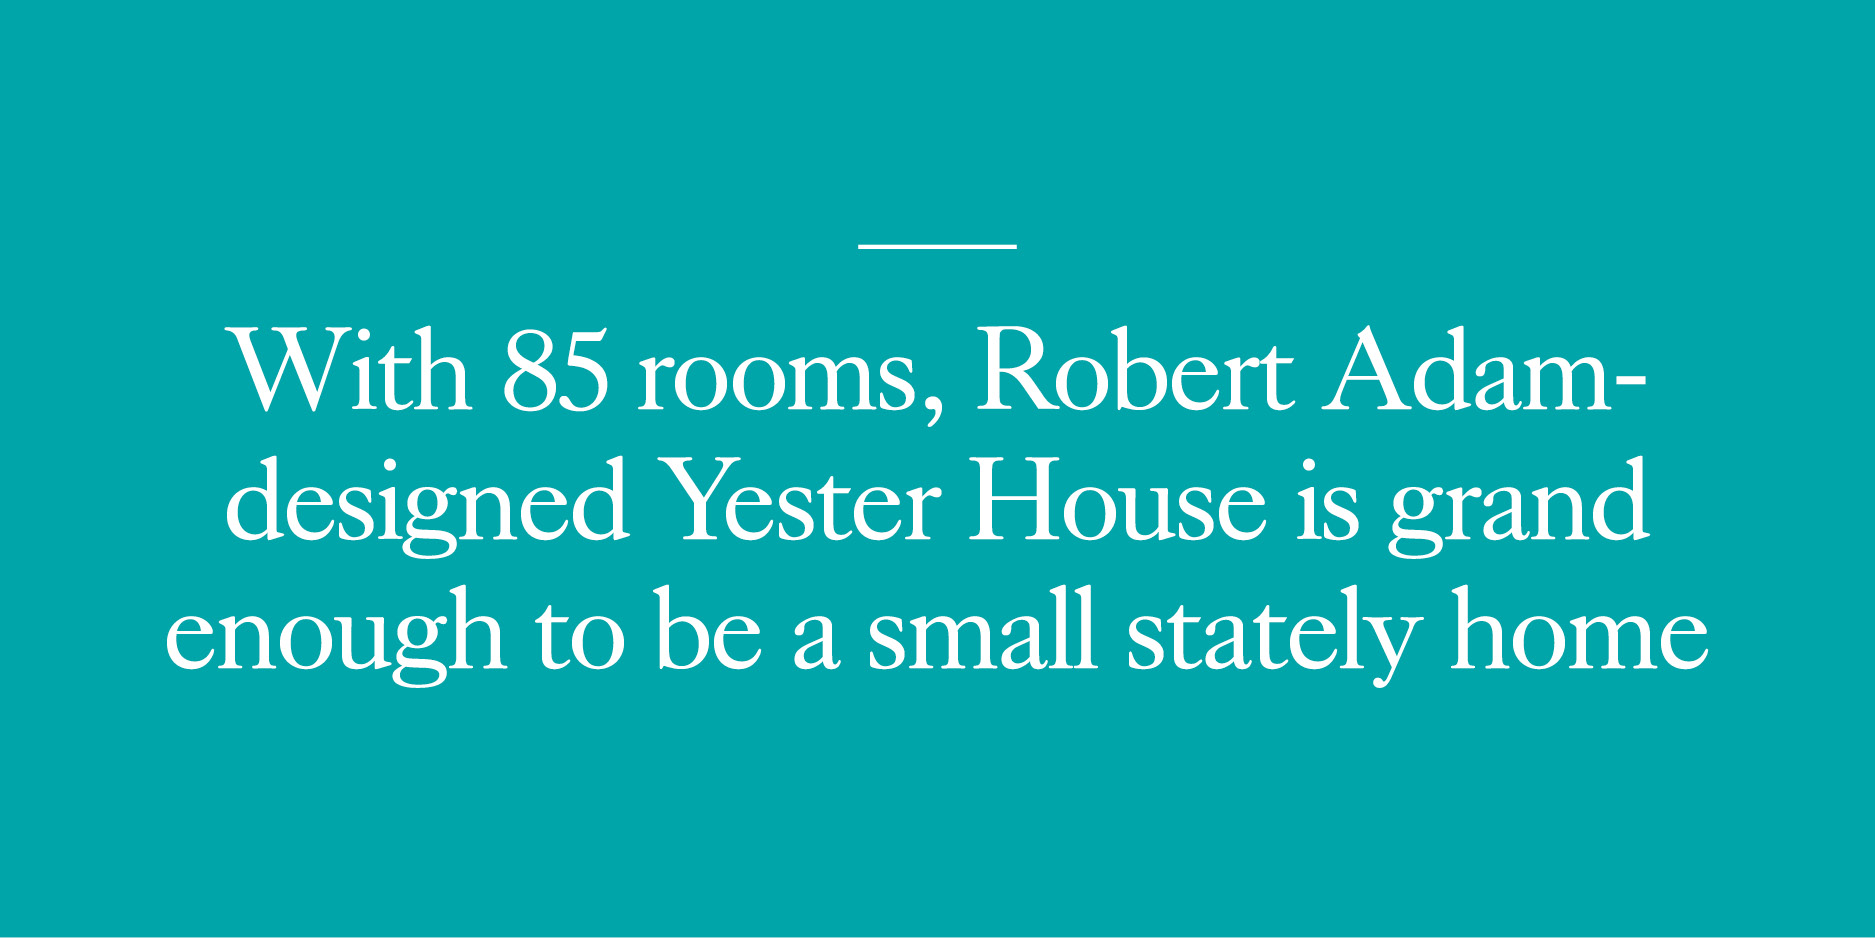 With 85 rooms, Robert Adam-designed Yester House is grand enough to be a small stately home